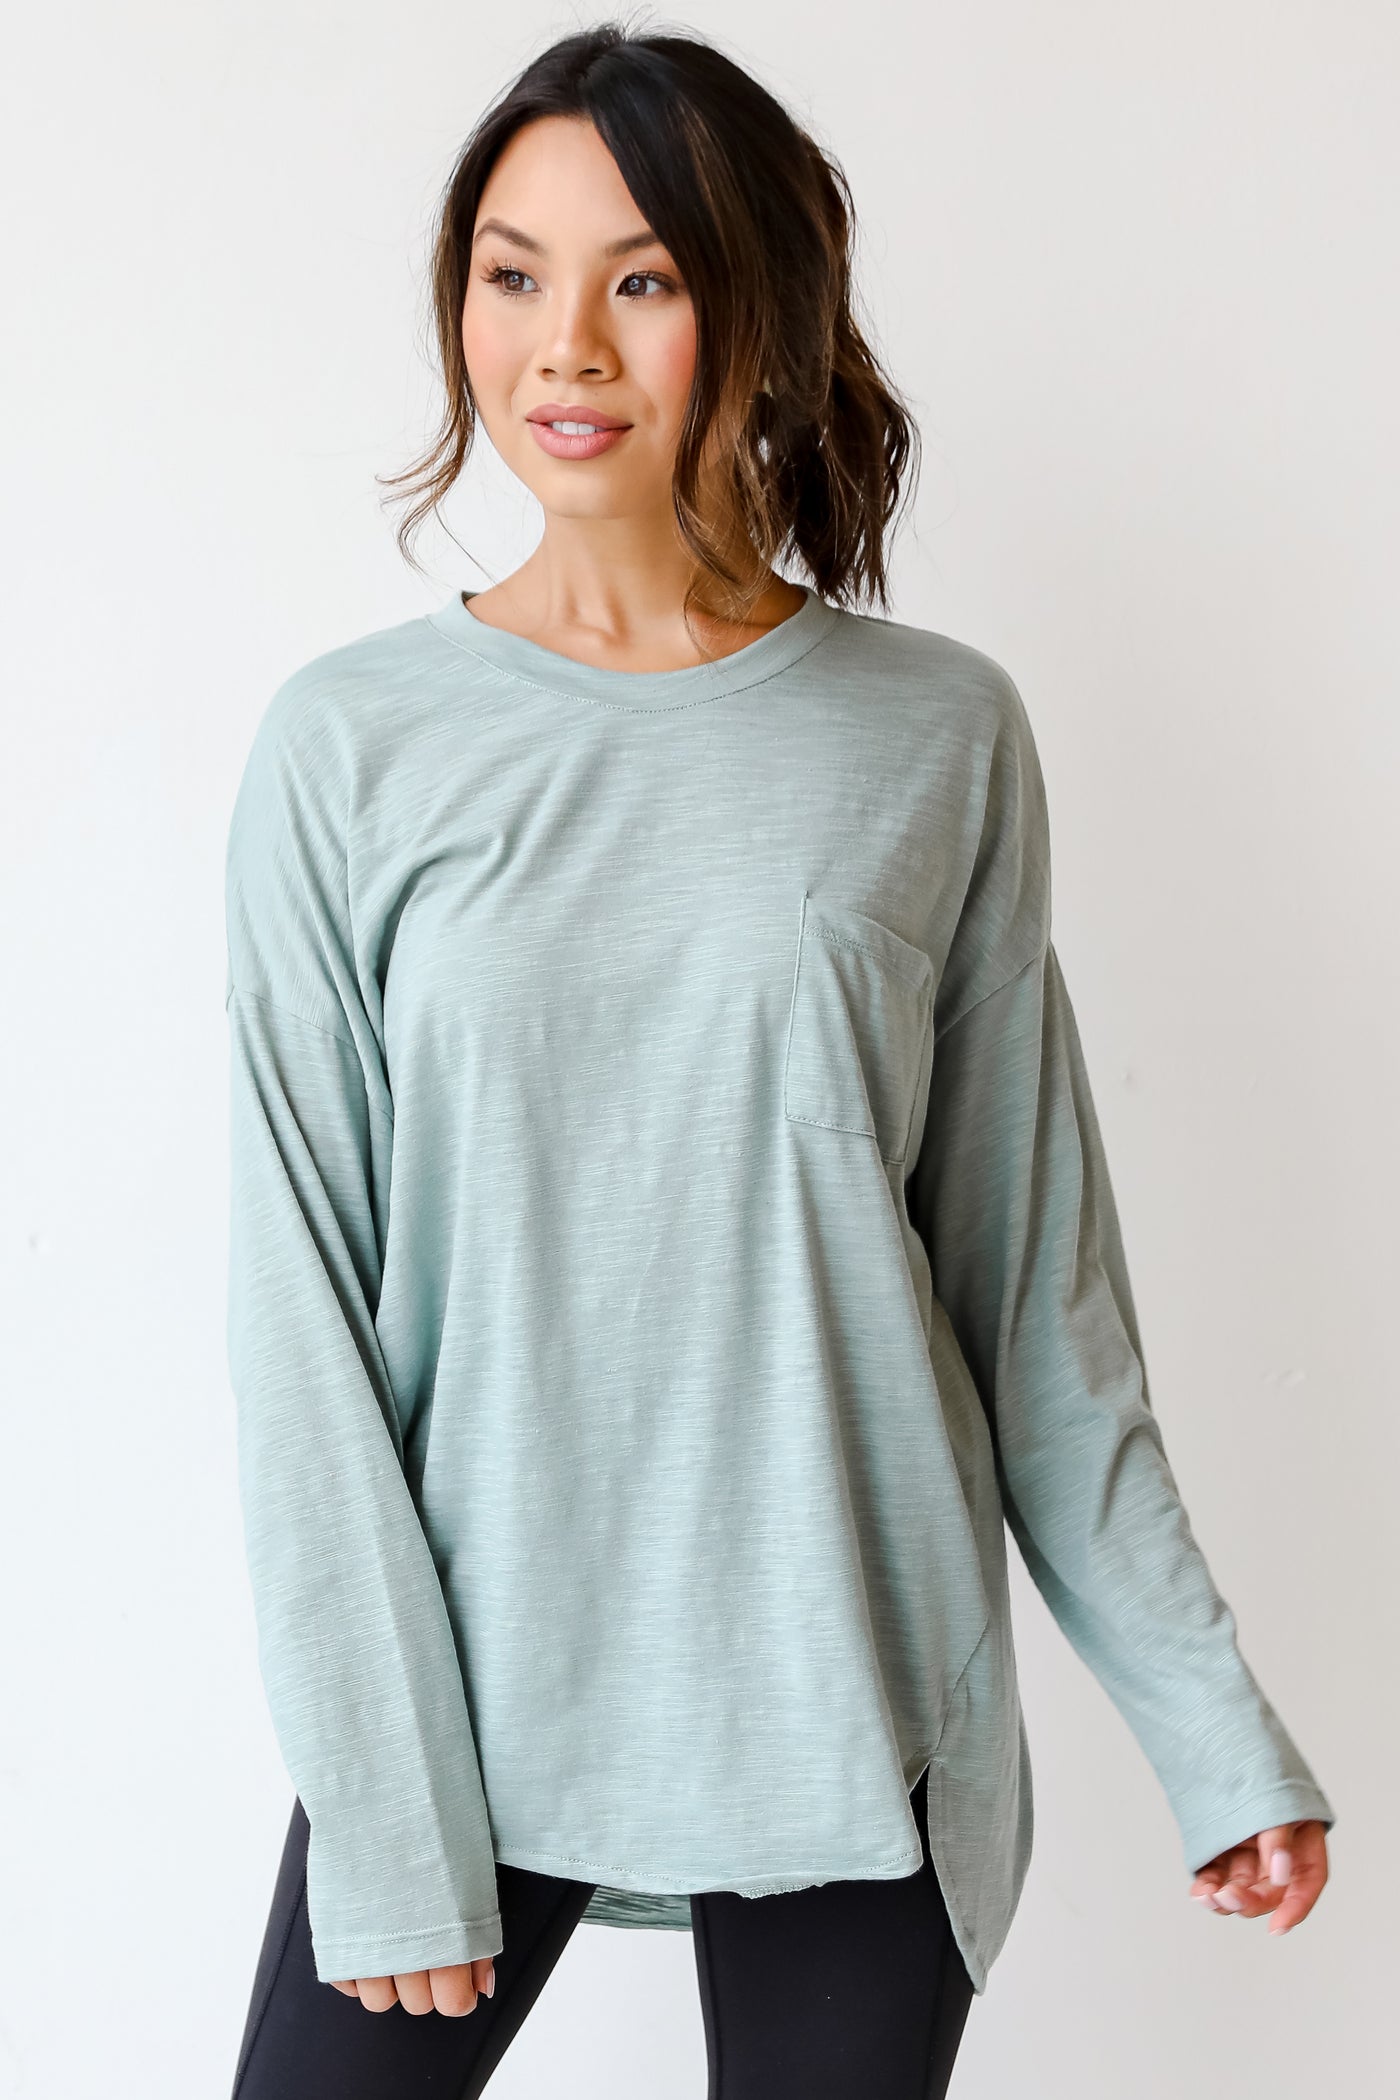 sage Knit Top front view